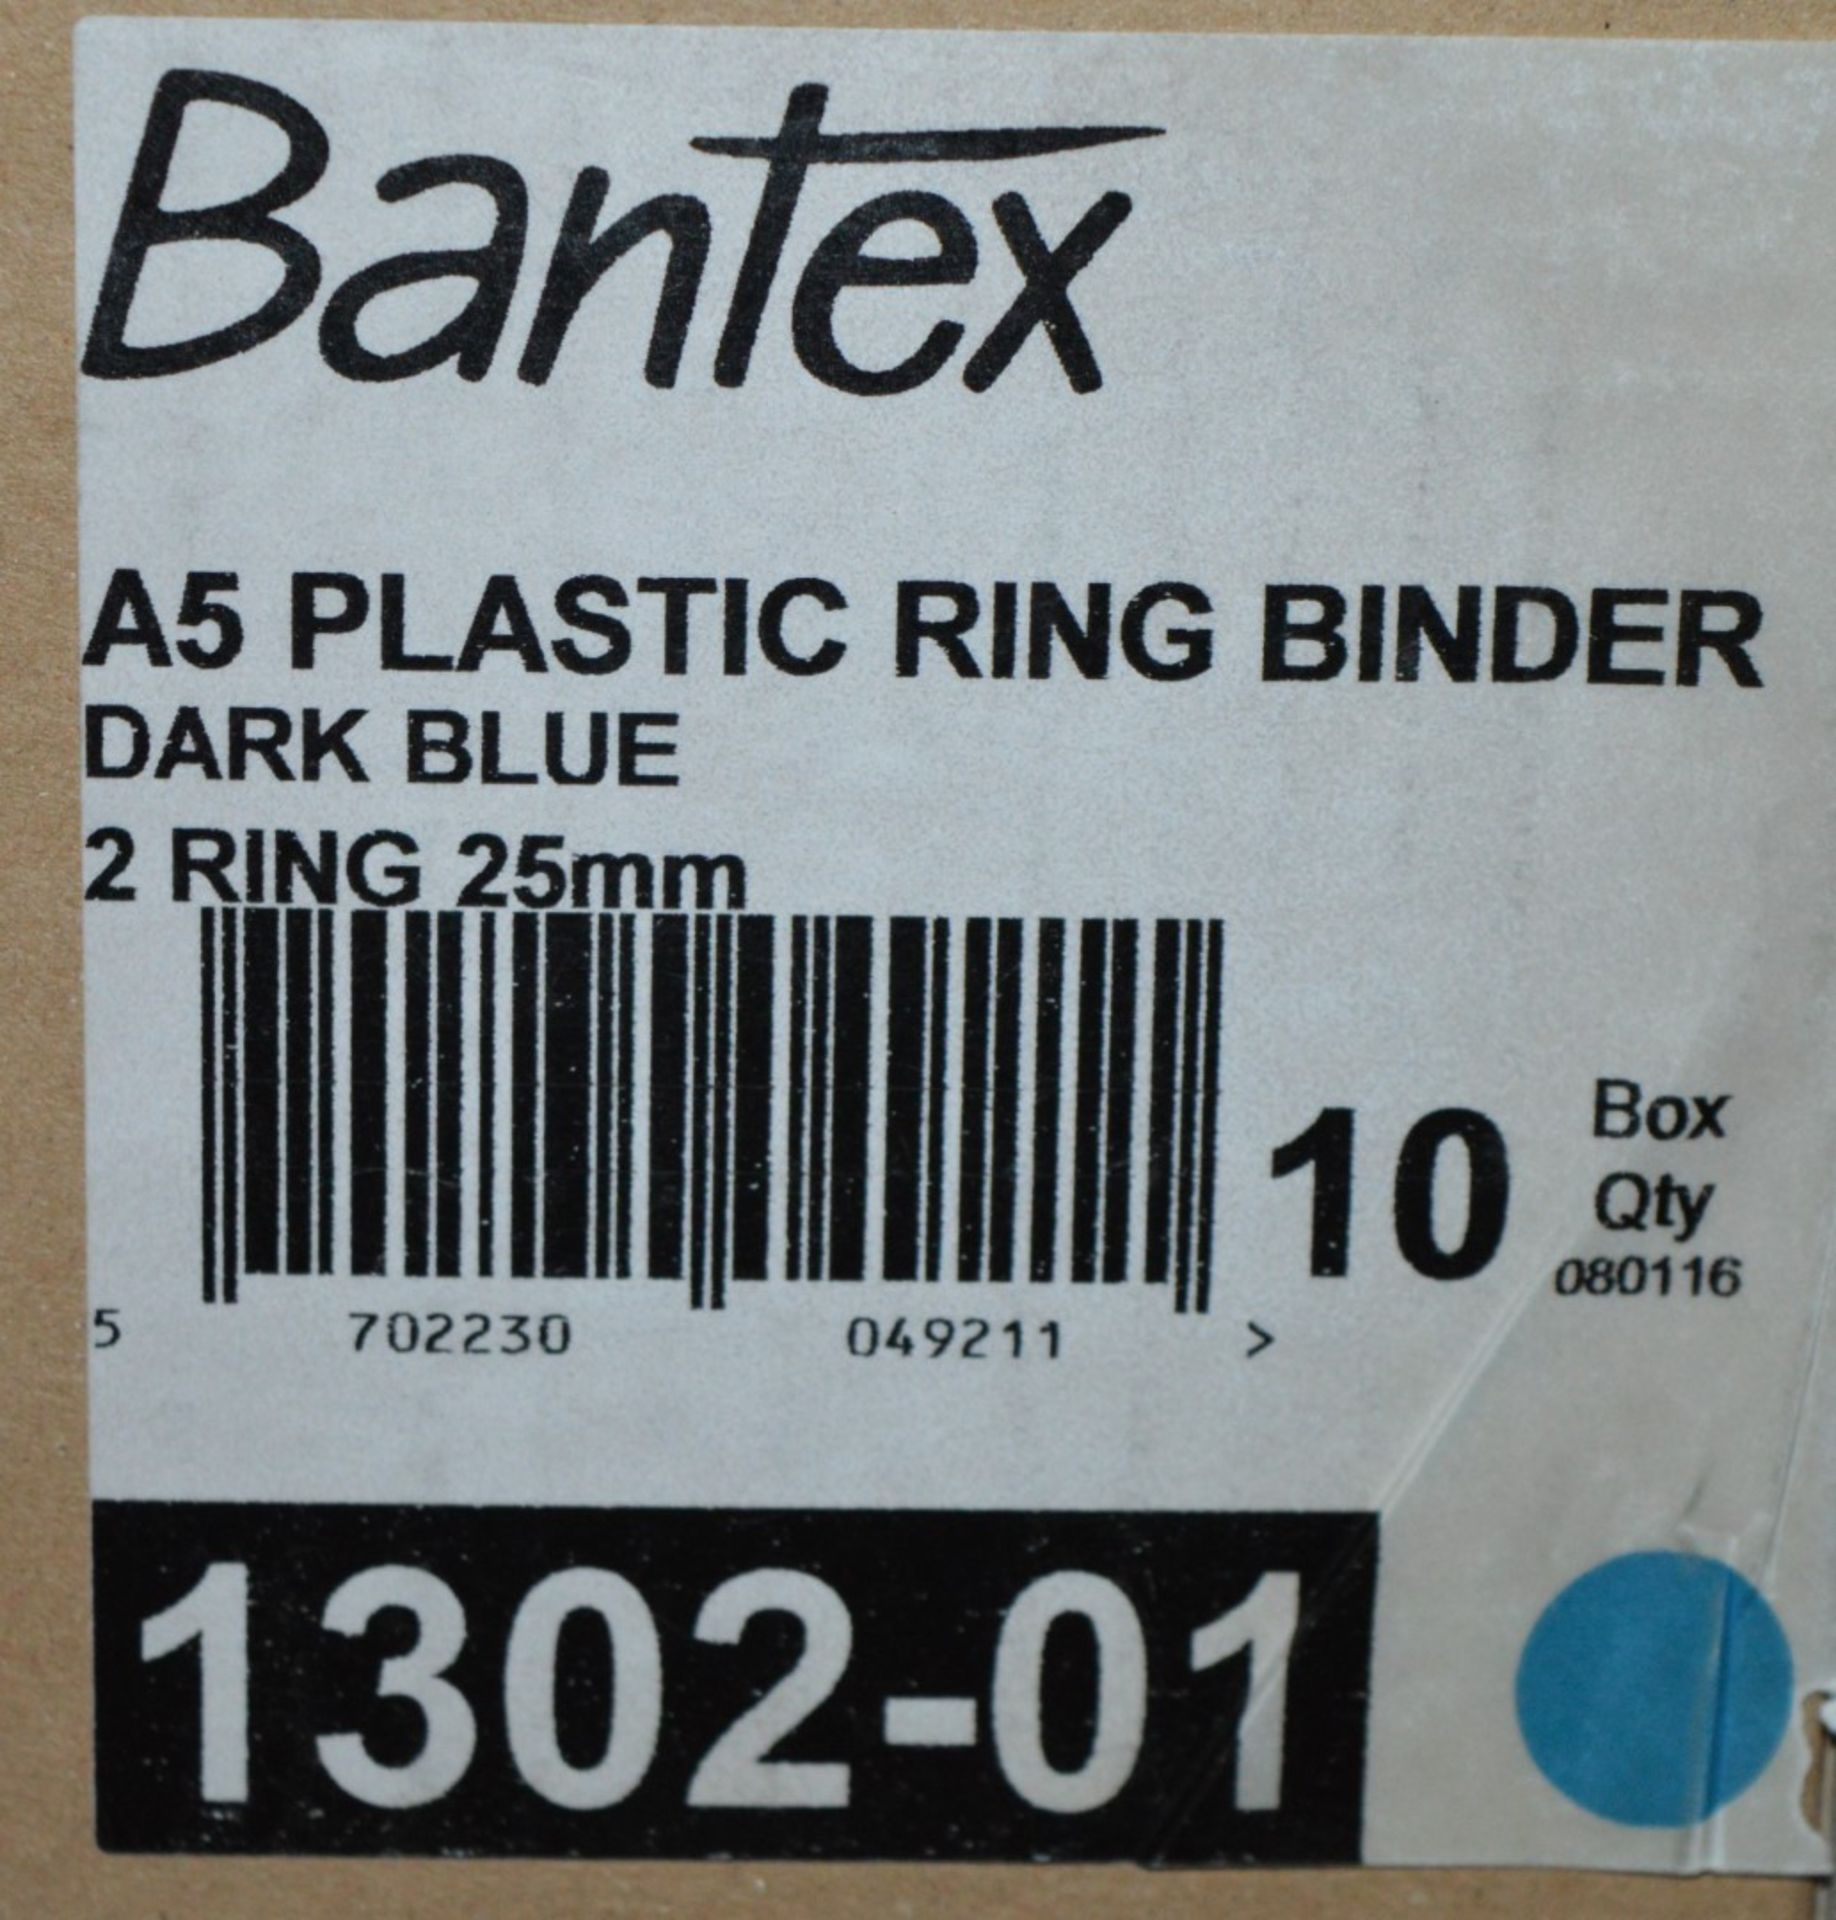 30 x Bantex A5 Plastic Ring Binders - Dark Blue, 2 Ring, 25mm - New Boxed Stock - CL011 - Ref 1302- - Image 3 of 4